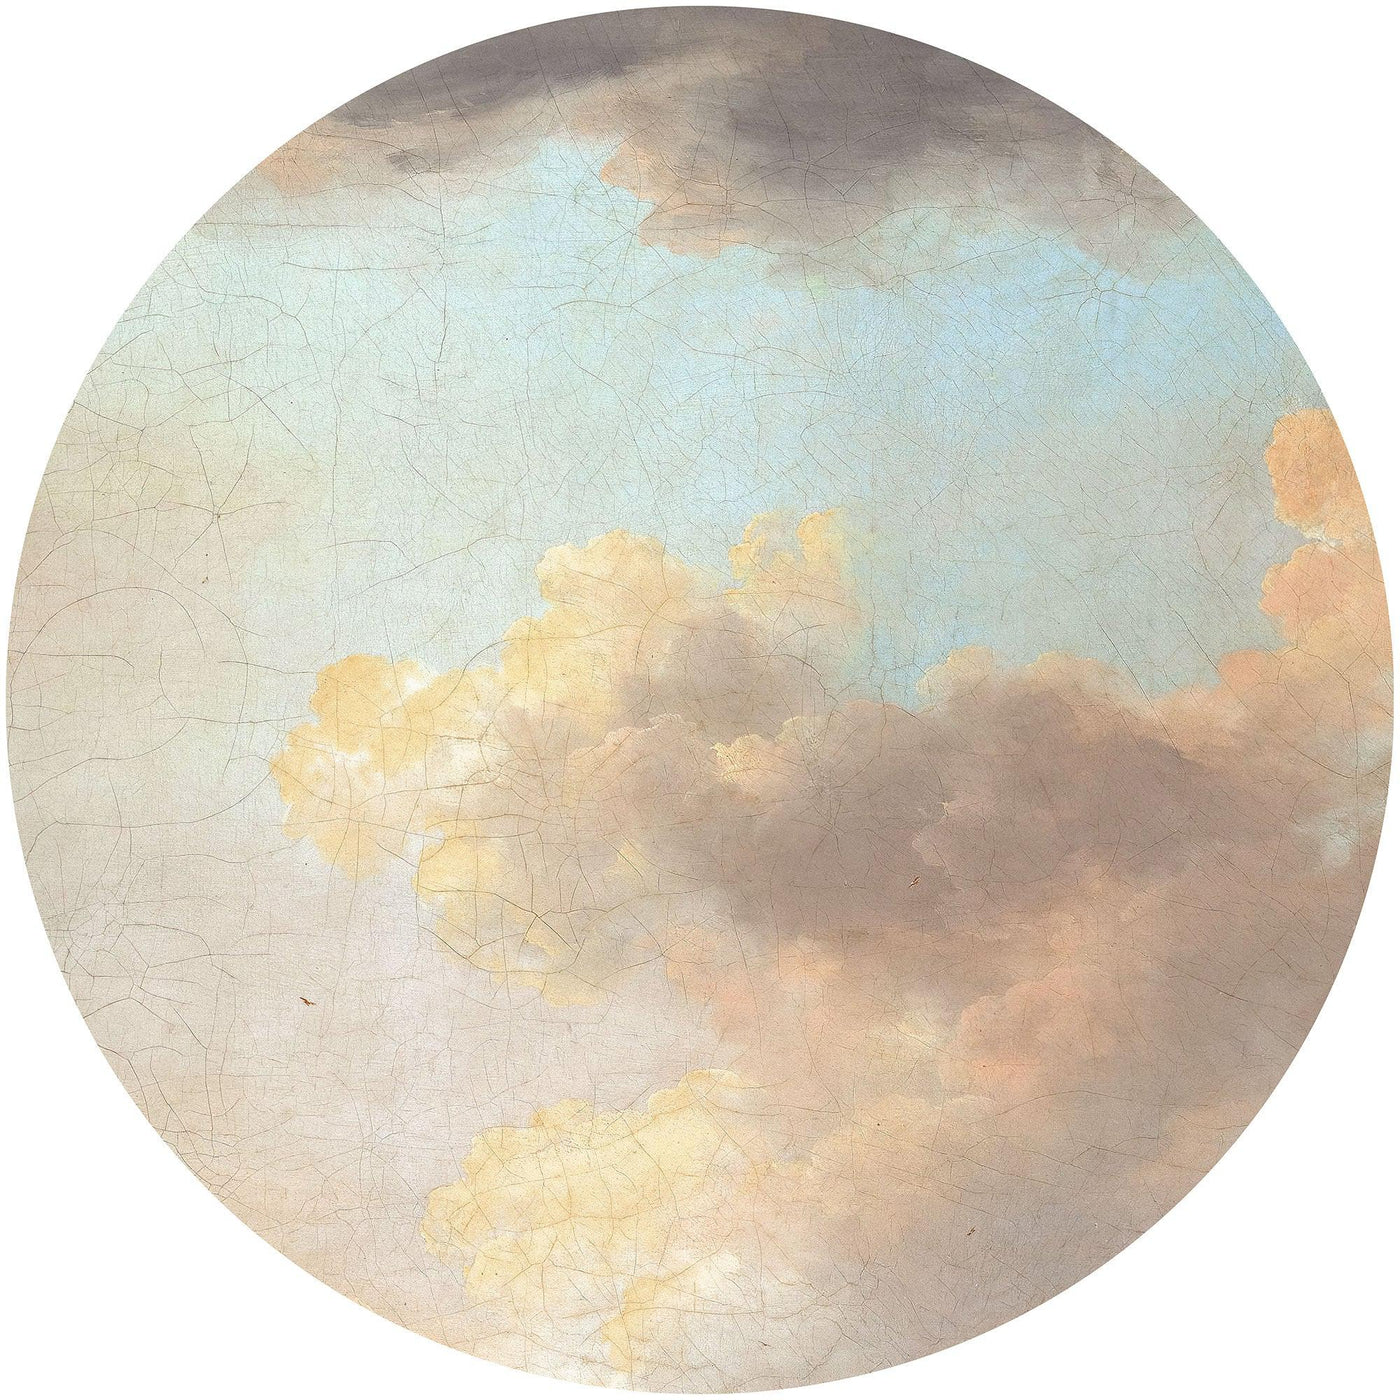 Cumulus Clouds Circle Wall Art (Self-Adhesive)-Wall Decor-ABSTRACT WALLPAPERS, ART WALLPAPER, CIRCLE WALL ART, ECO MURALS, NATURE WALL ART, PATTERN WALLPAPERS, SUSTAINABLE DECOR-Forest Homes-Nature inspired decor-Nature decor